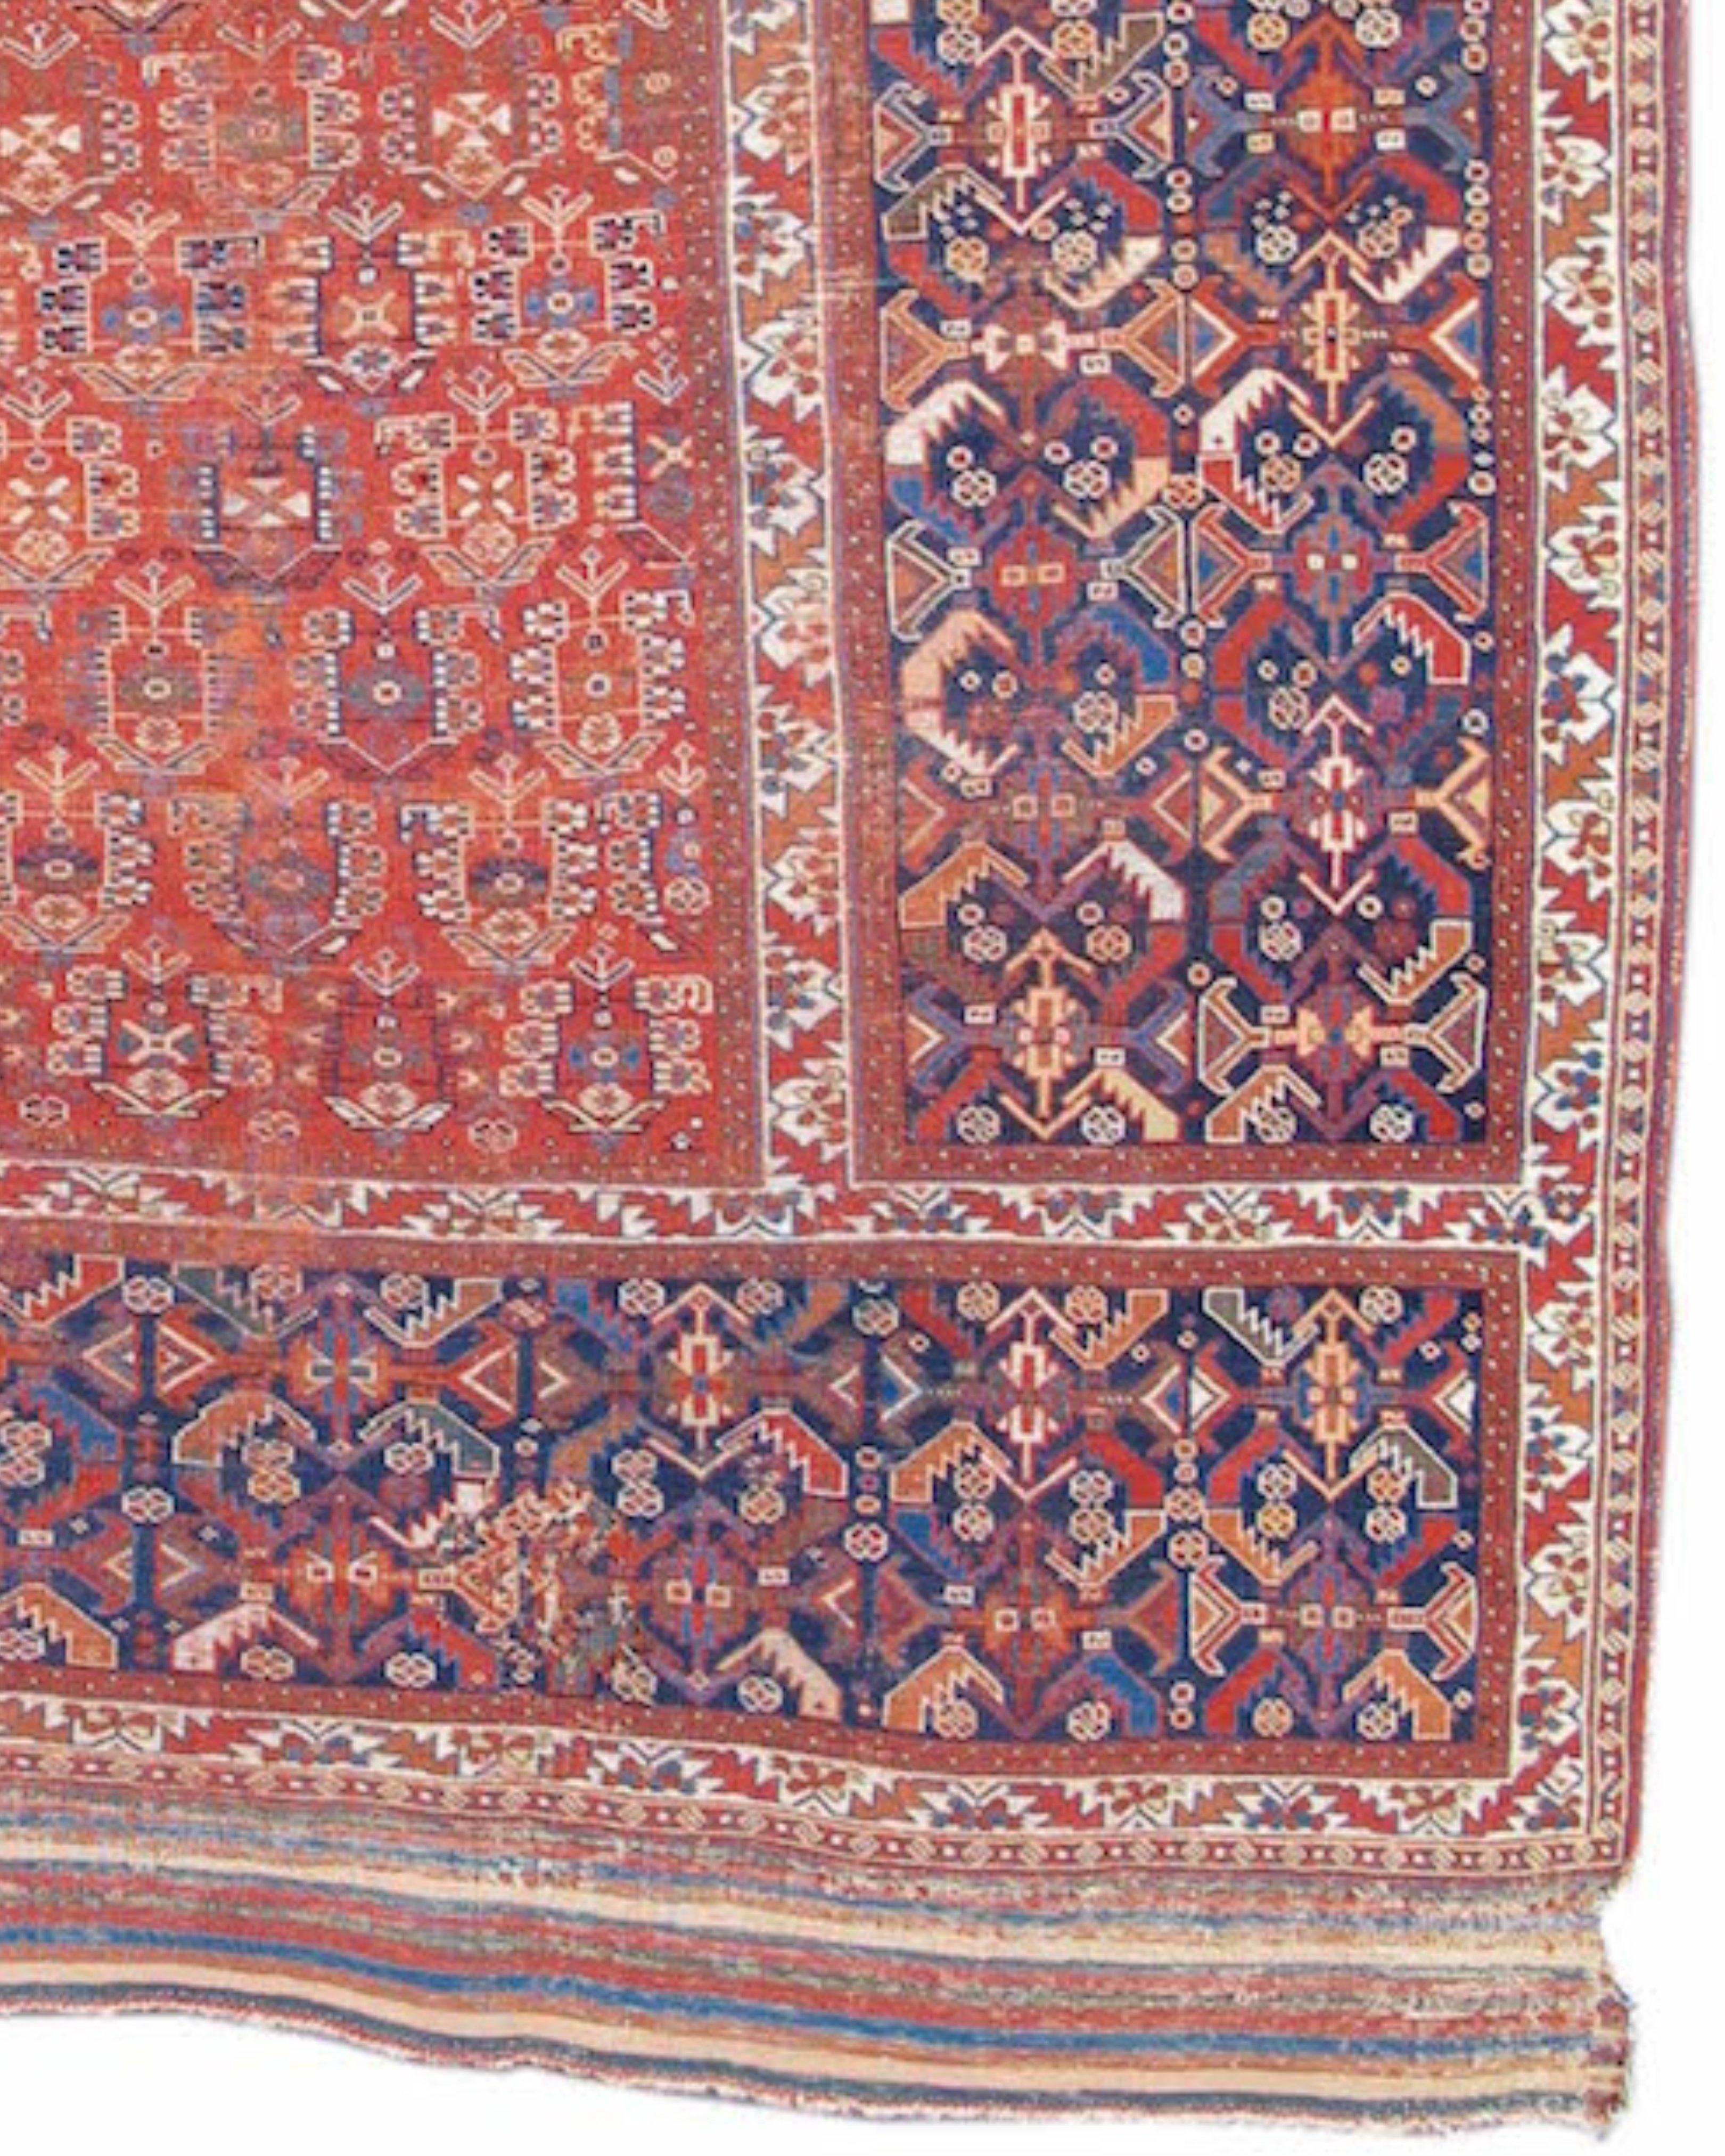 Wool Antique Southwest Persian Afshar Triclinnium Rug, Late 19th Century For Sale